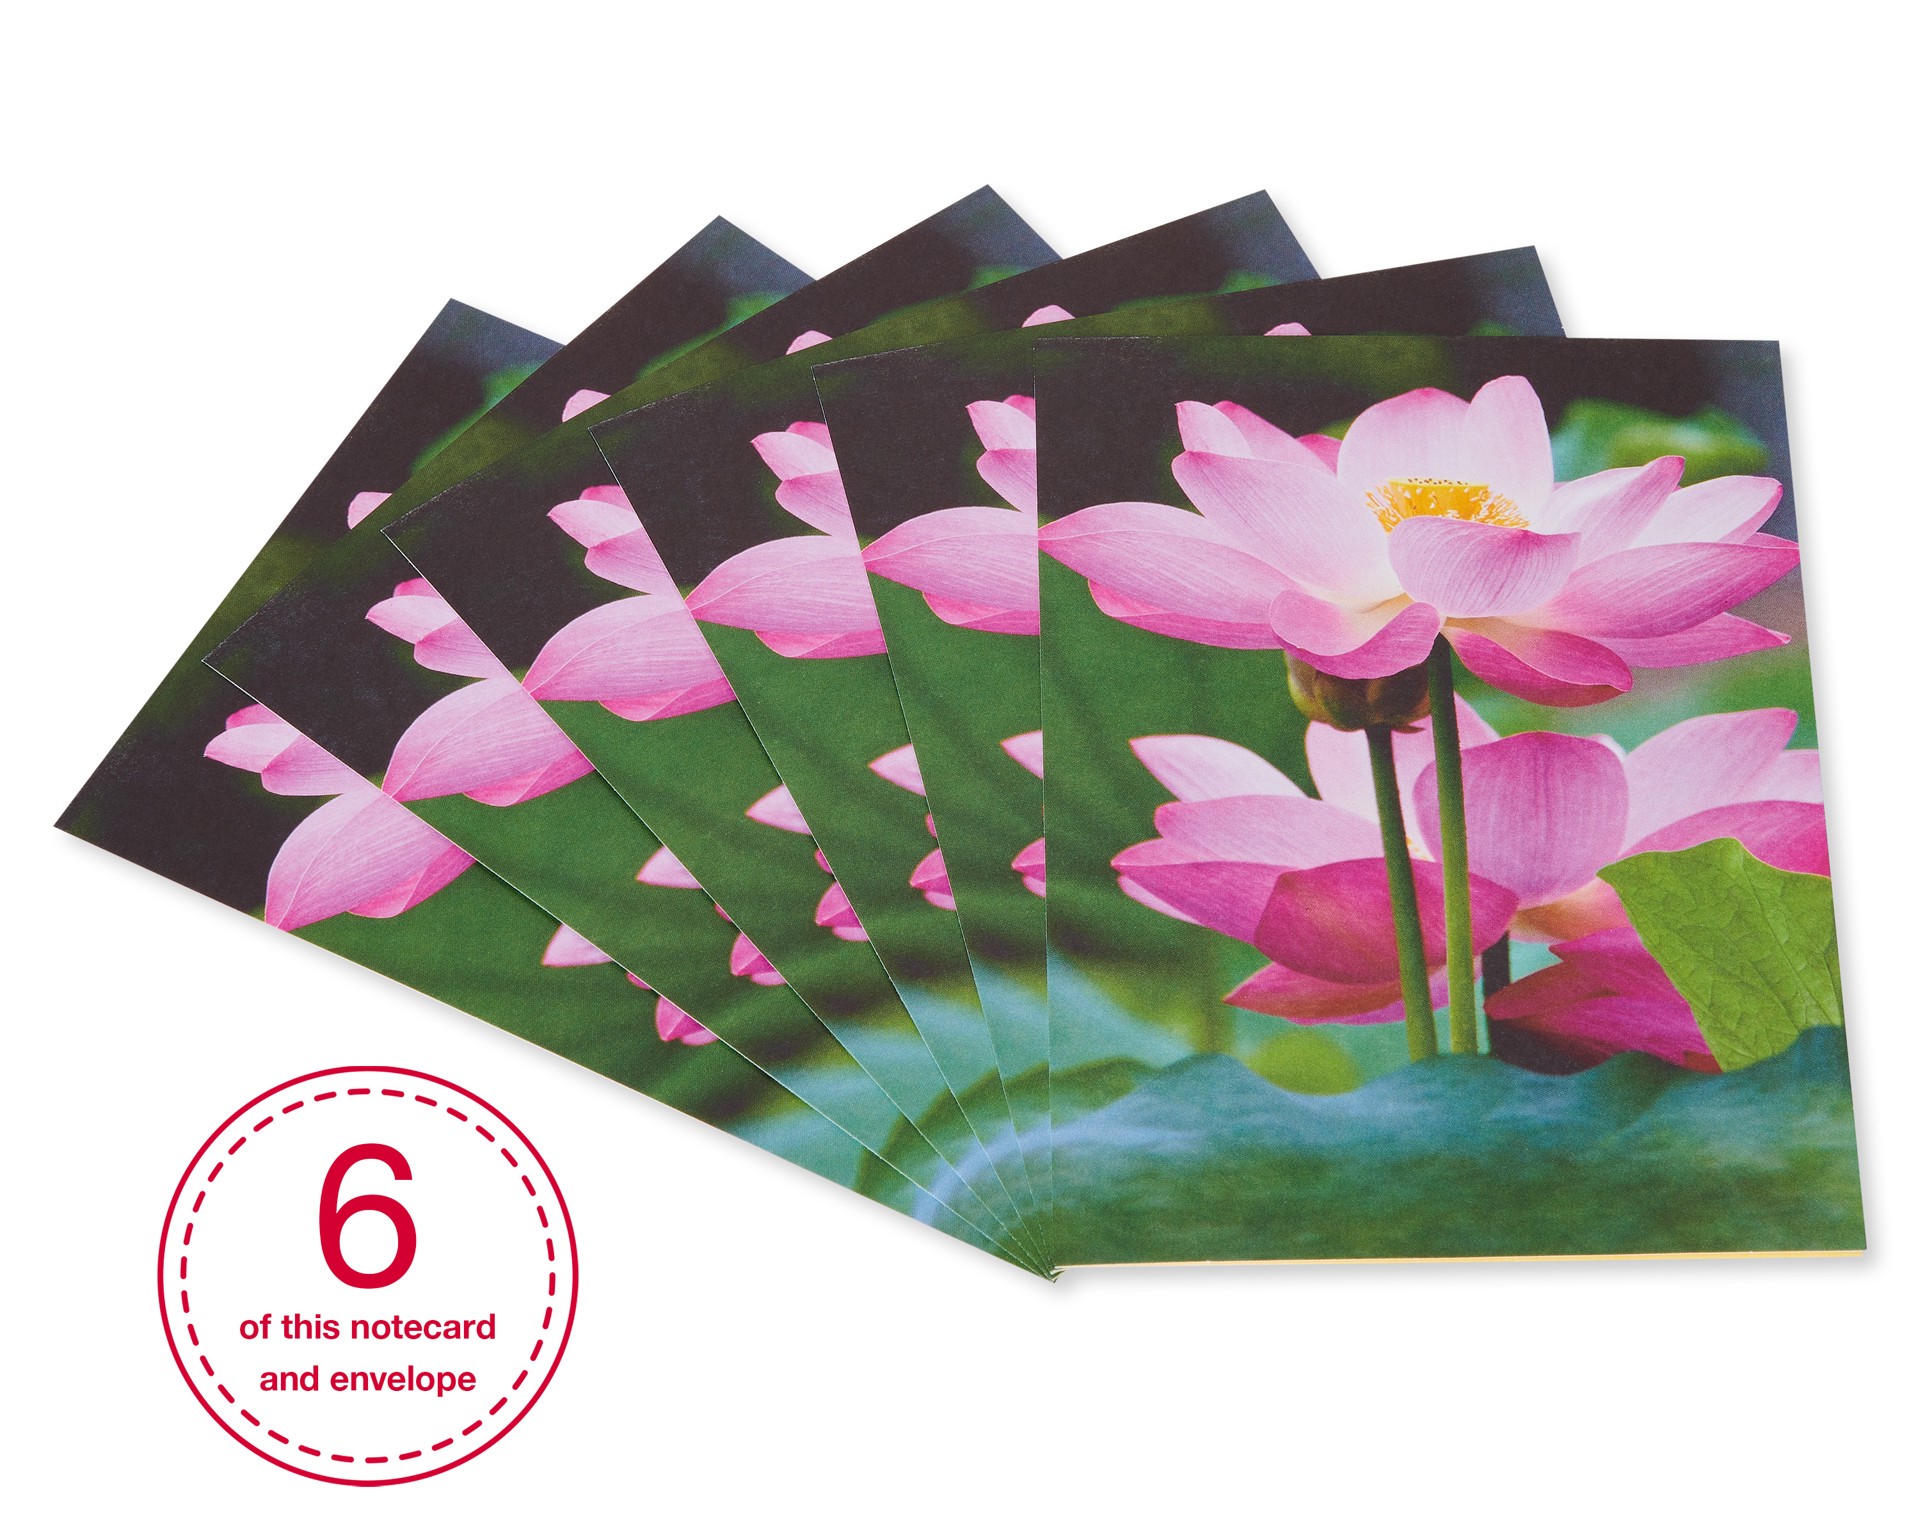 slide 1 of 5, American Greetings cards are a great way to connect with the people you care about. This gorgeous embellished photography design of a pink blossom with shining embellishments is a lovely way to add beauty to their day. Let them know you're thinking of them. Features 6 cards and 6 envelopes., 6 ct